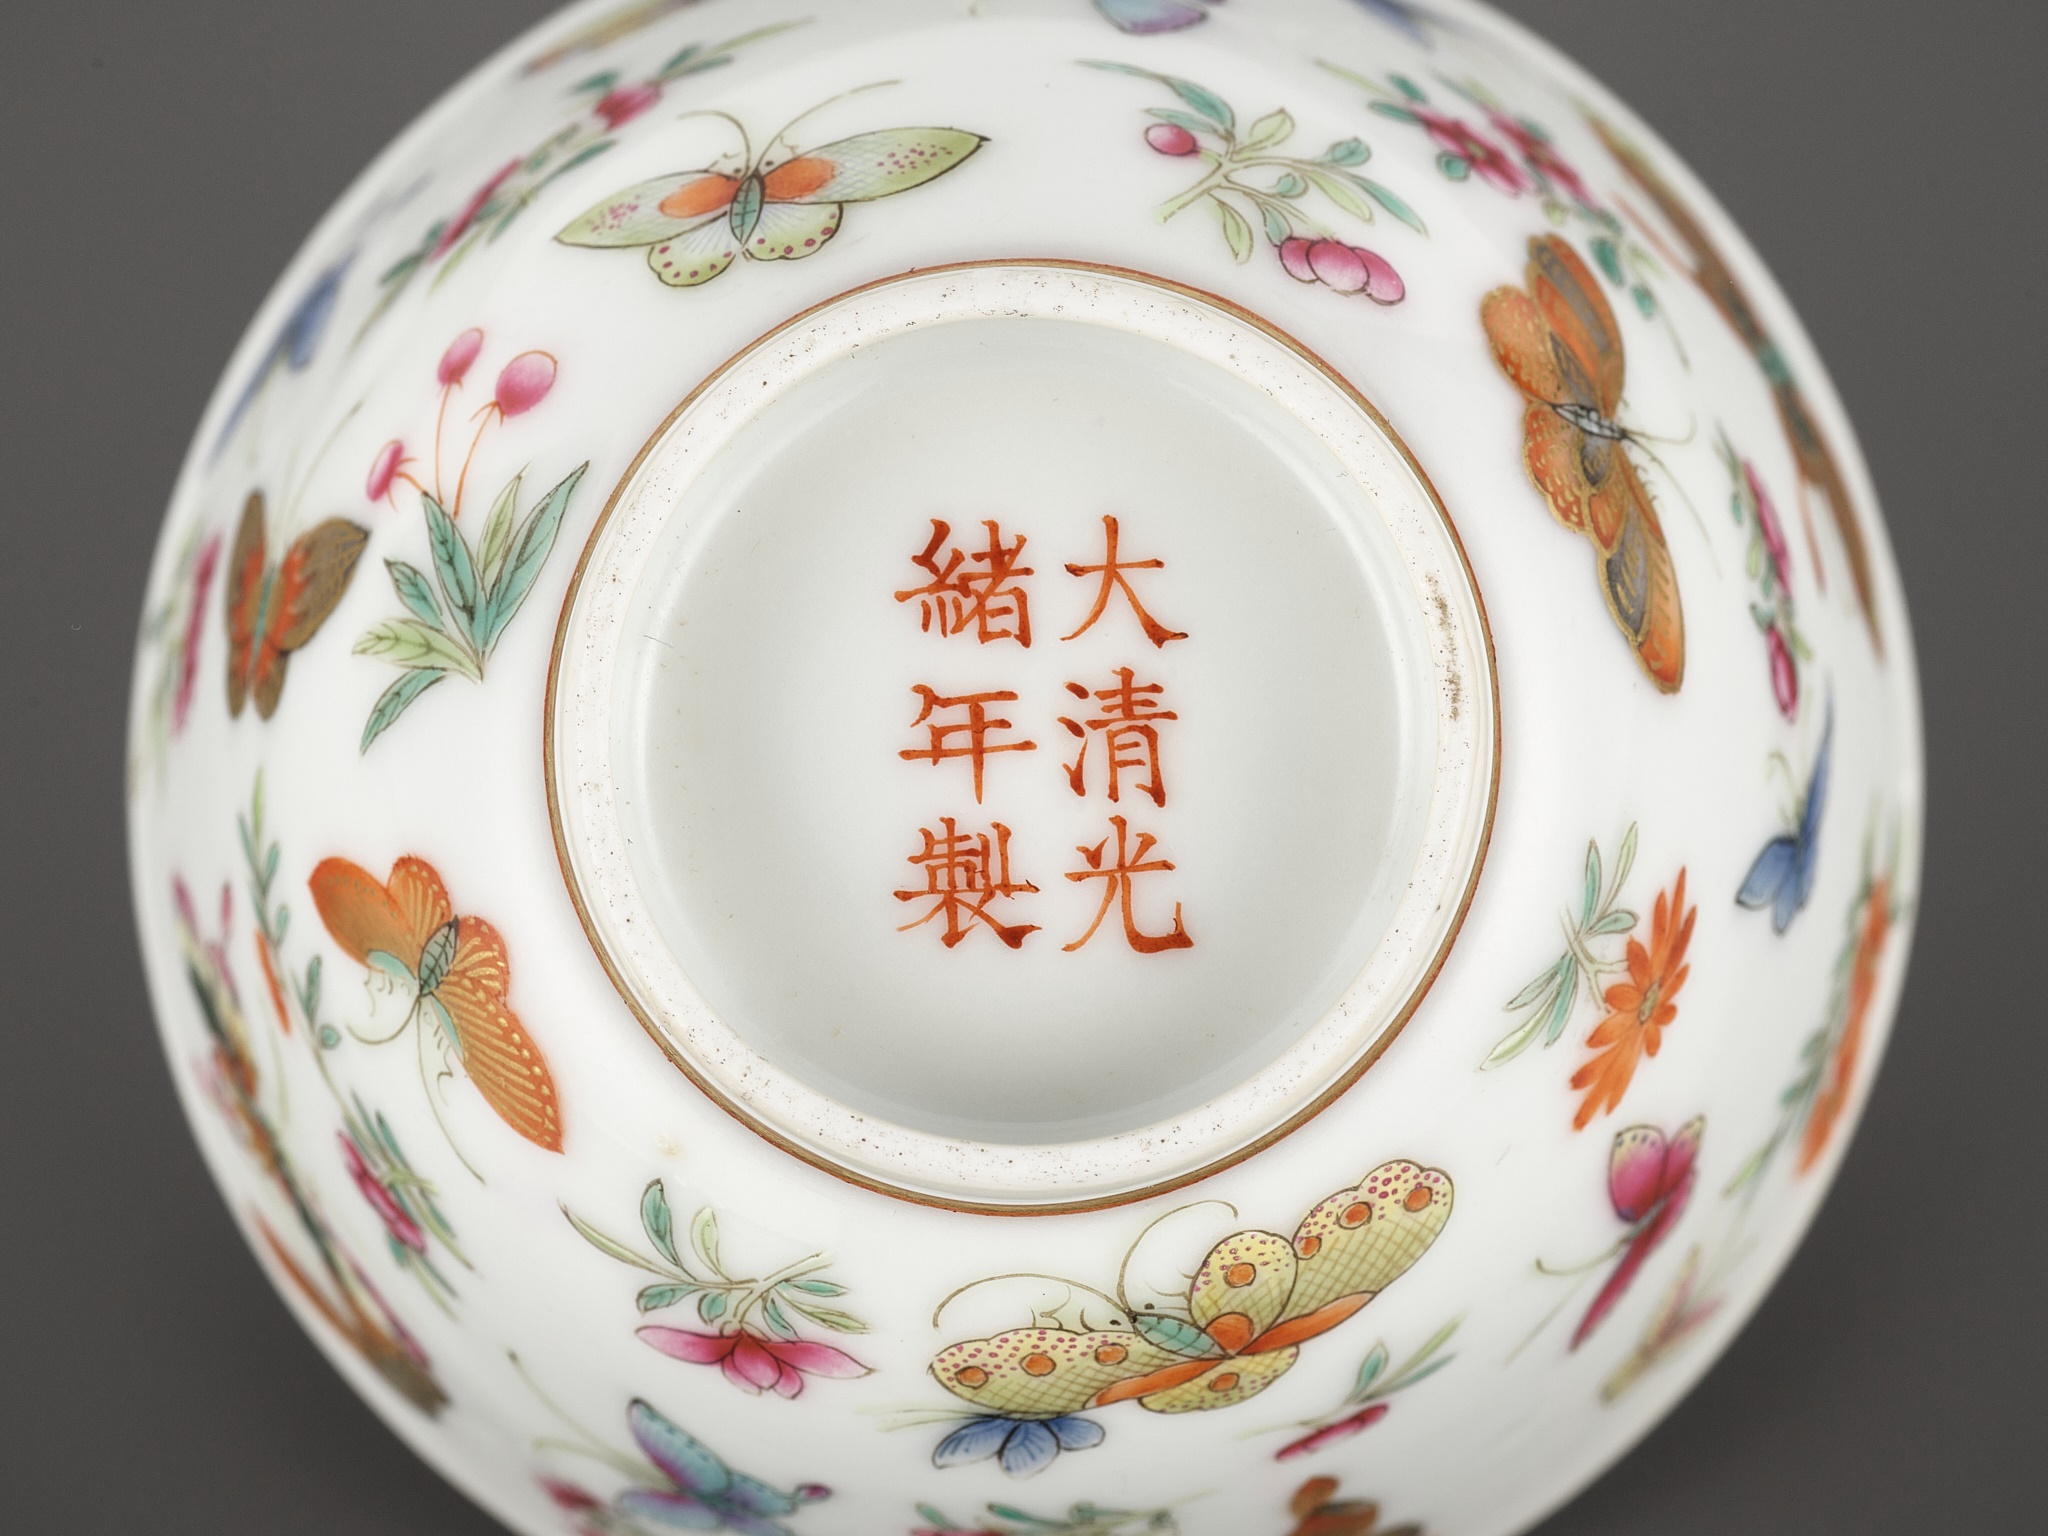 A SUPERB PAIR OF FAMILLE ROSE 'BUTTERFLY' BOWLS, GUANGXU MARKS AND PERIOD - Image 3 of 13